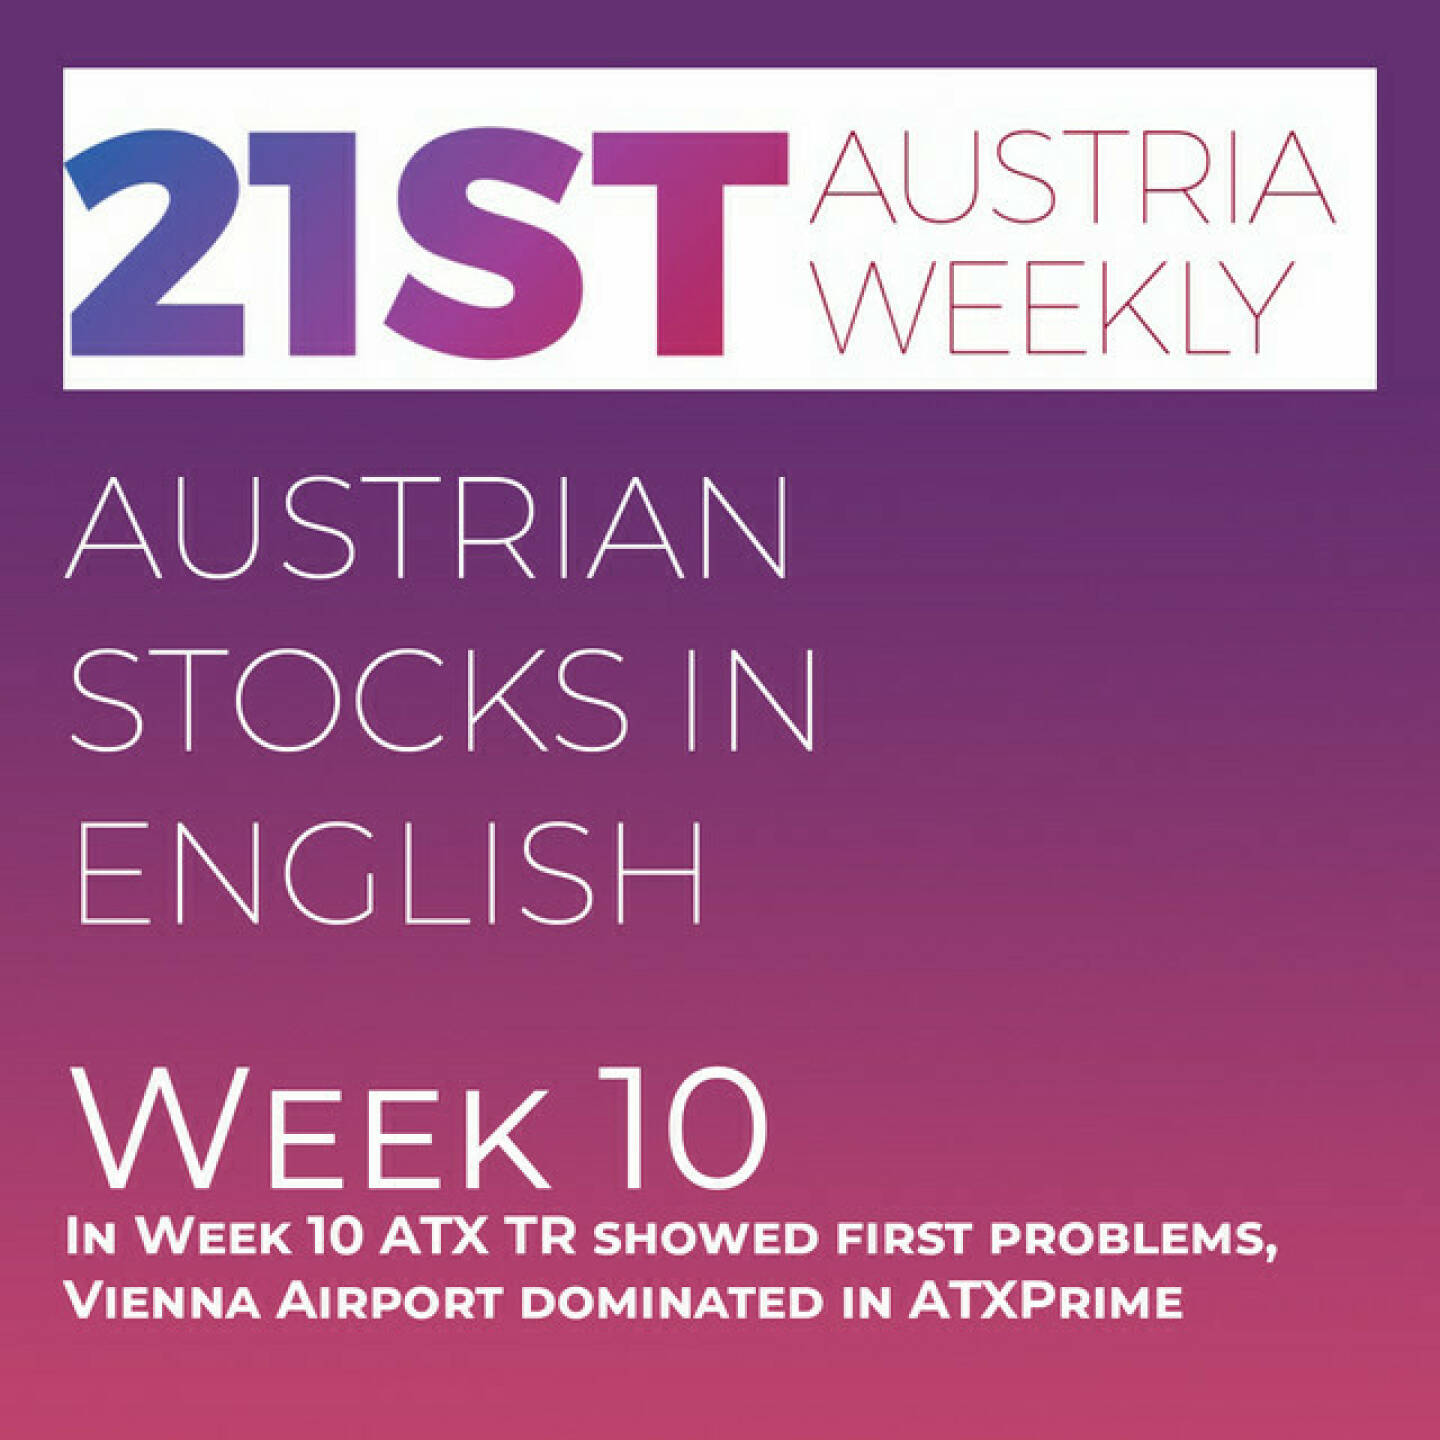 https://open.spotify.com/episode/5XkvU4AJ4SEKDAwGEhYCp5
Austrian Stocks in English: In Week 10 ATX TR showed first problems, Vienna Airport dominated in ATXPrime - <p>Welcome  to &#34;Austrian Stocks in English - presented by Palfinger&#34;, the english spoken weekly Summary for the Austrian Stock Market,  positioned every Sunday in the mostly german languaged Podcast &#34;Audio-CD.at Indie Podcasts&#34;- Wiener Börse, Sport Musik und Mehr“ .<br/><br/>The following script is based on our 21st Austria weekly and in Week 10 ATX TR went lower, losing 2,66 percent to 7274 points. Stocks of Vienna Airport were best in ATXprime, leaving the IFM Offer behind. News came from Vienna Stock Exchange, AT&amp;S, A1 Group, Andritz, Zumtobel, Frequentis, Addiko, Palfinger, Lenzing, voestalpine and Frequentis. These News are spoken by the absolutely smart Alison. <br/><br/>Please rate my Podcast on Apple Podcasts (or Spotify): <a href=https://podcasts.apple.com/at/podcast/audio-cd-at-indie-podcasts-wiener-boerse-sport-musik-und-mehr/id1484919130 target=_blank>https://podcasts.apple.com/at/podcast/audio-cd-at-indie-podcasts-wiener-boerse-sport-musik-und-mehr/id1484919130</a> .And please spread the word : <a href=https://www.boerse-social.com/21staustria target=_blank>https://www.boerse-social.com/21staustria</a> - the address to subscribe to the weekly summary as a PDF.</p>